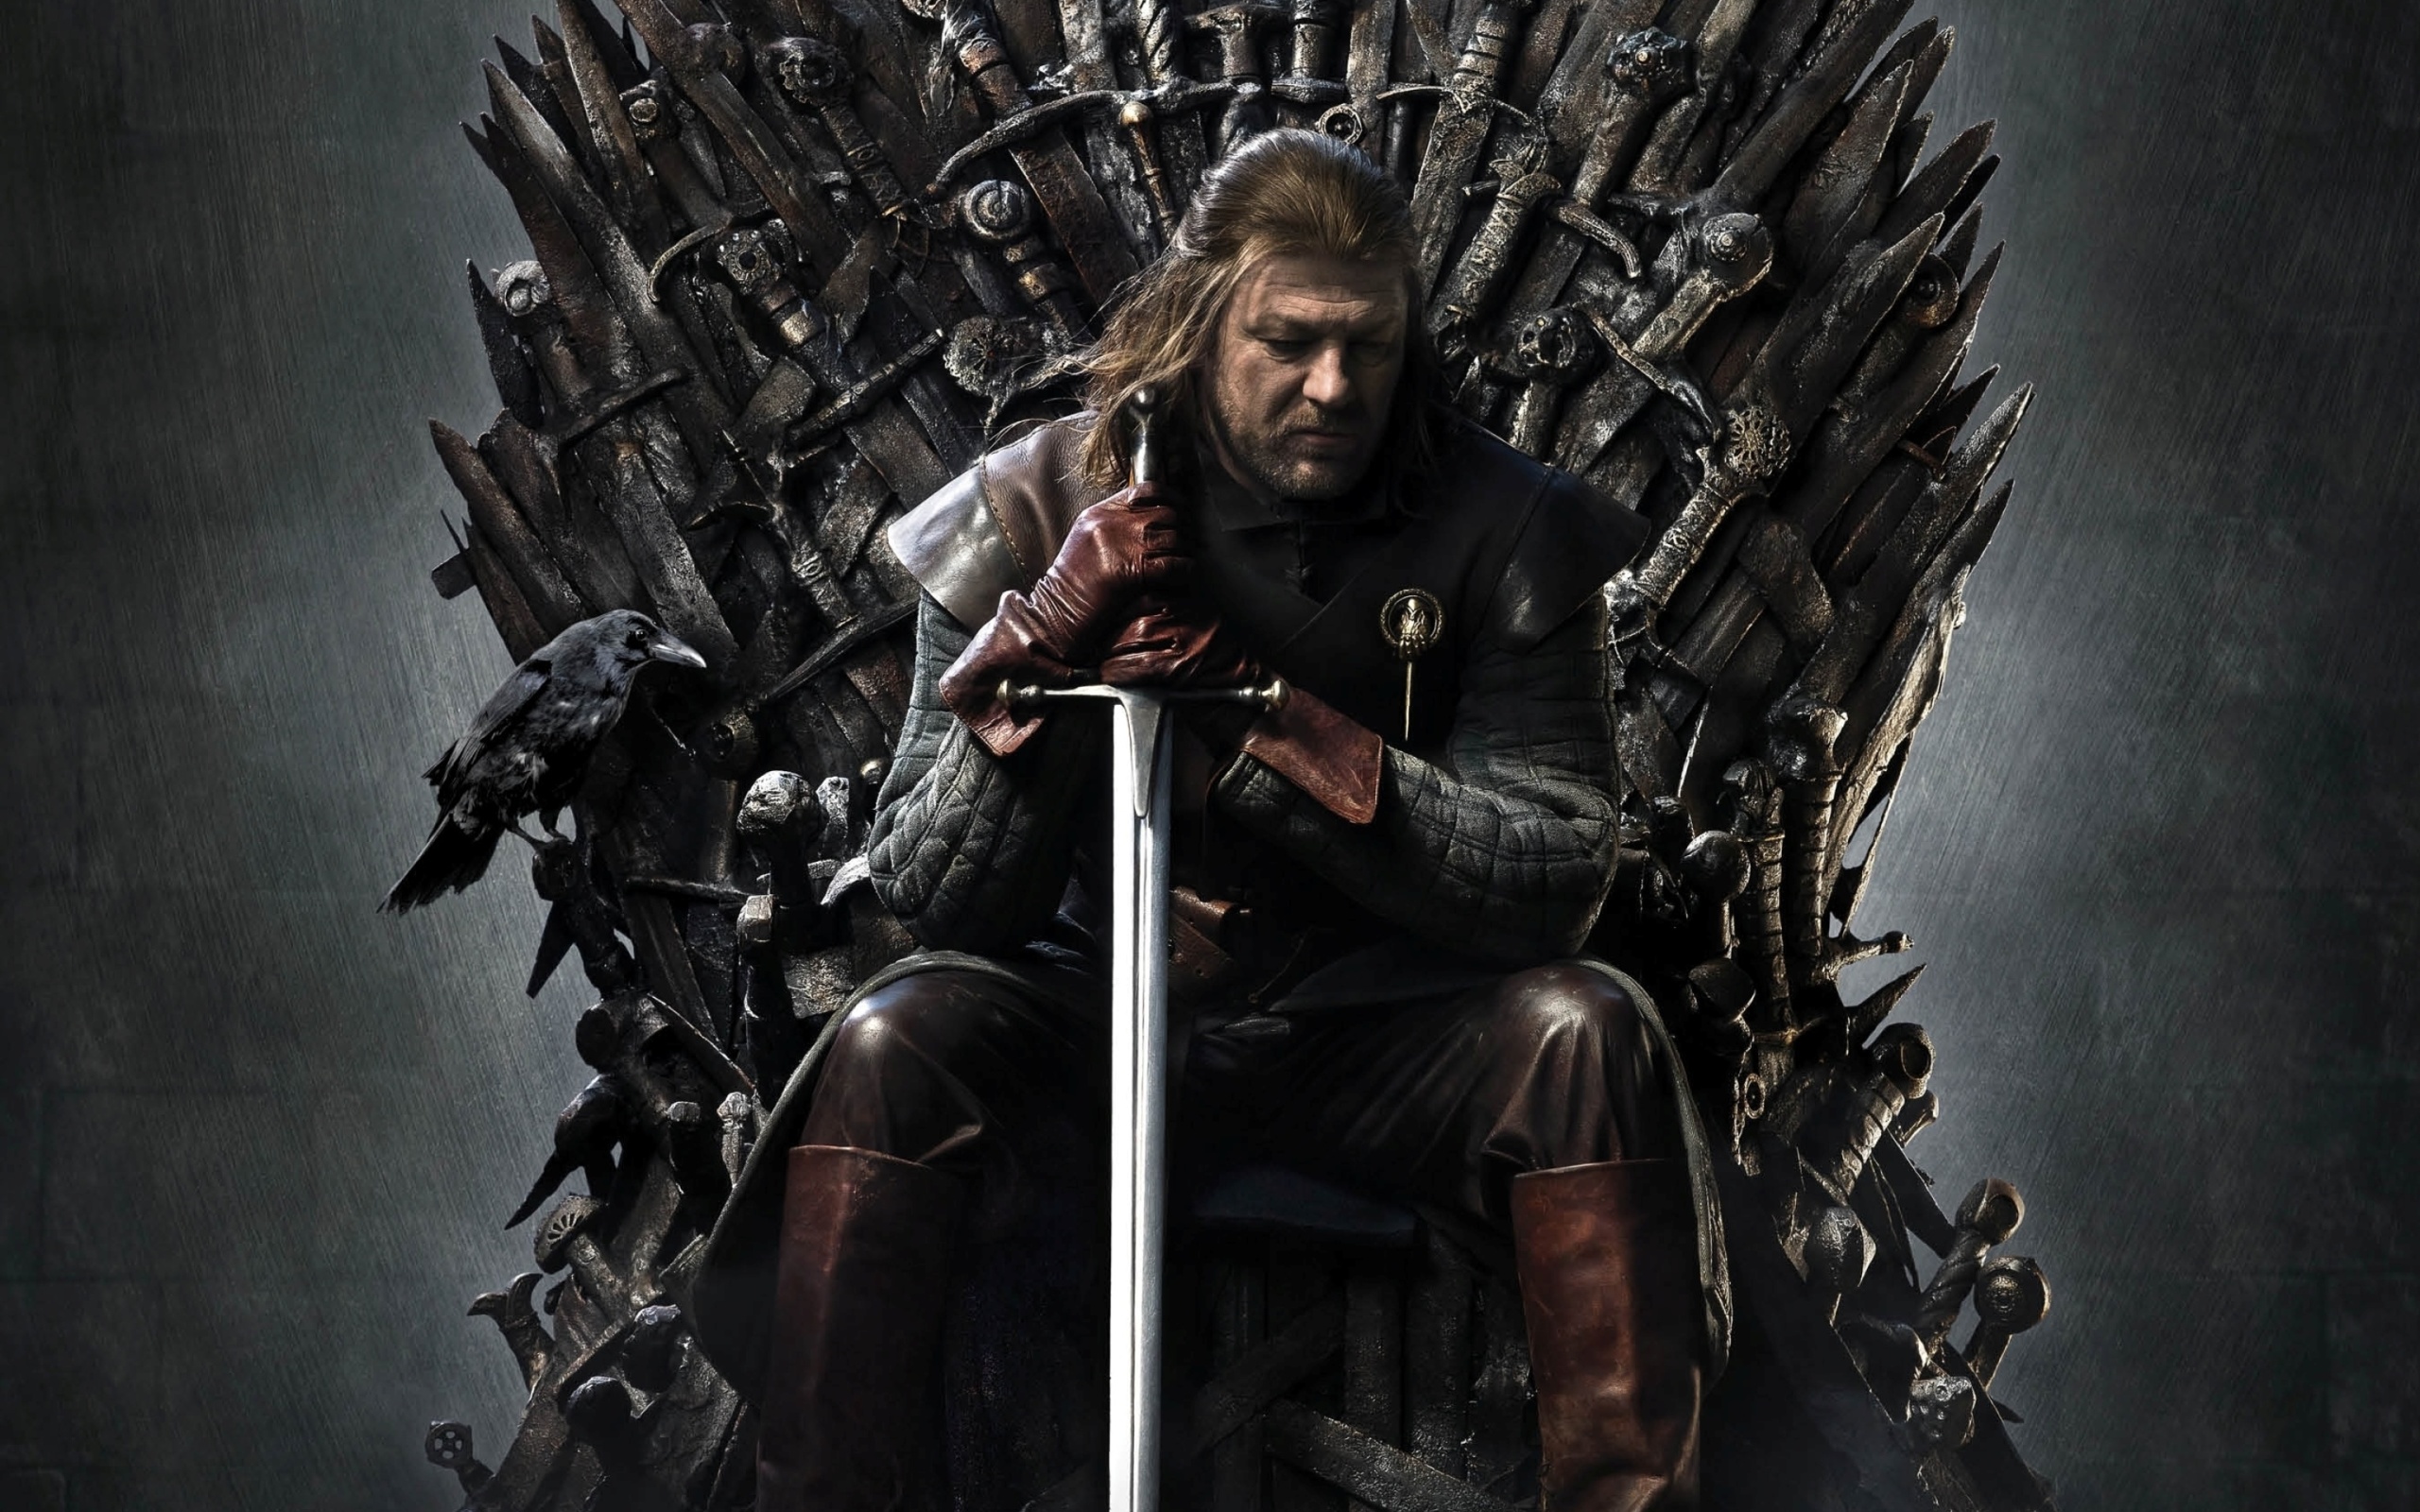 Das Game Of Thrones A Song of Ice and Fire with Ned Star Wallpaper 2560x1600